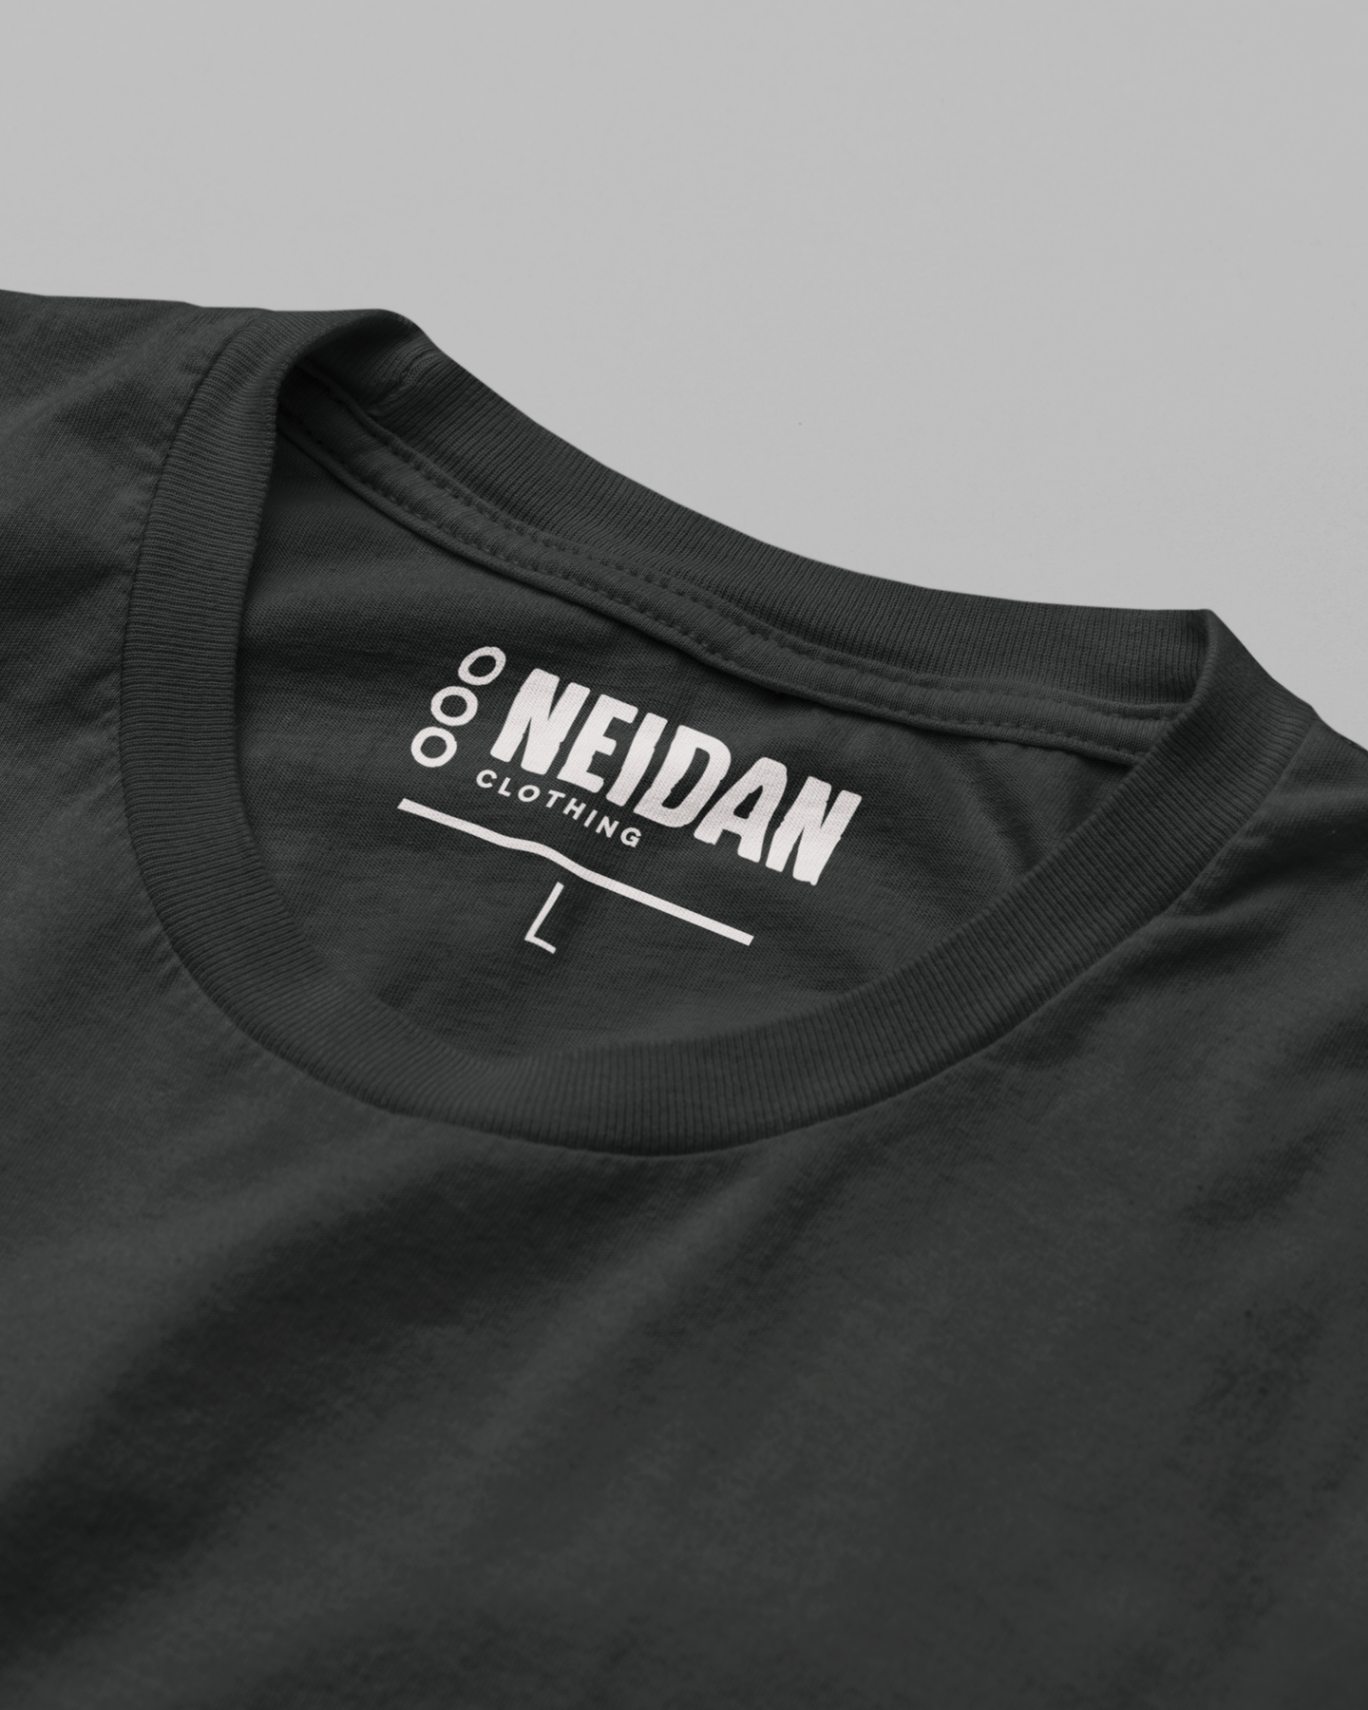 closeup of a black t shirt neck label with the neidan clothing label